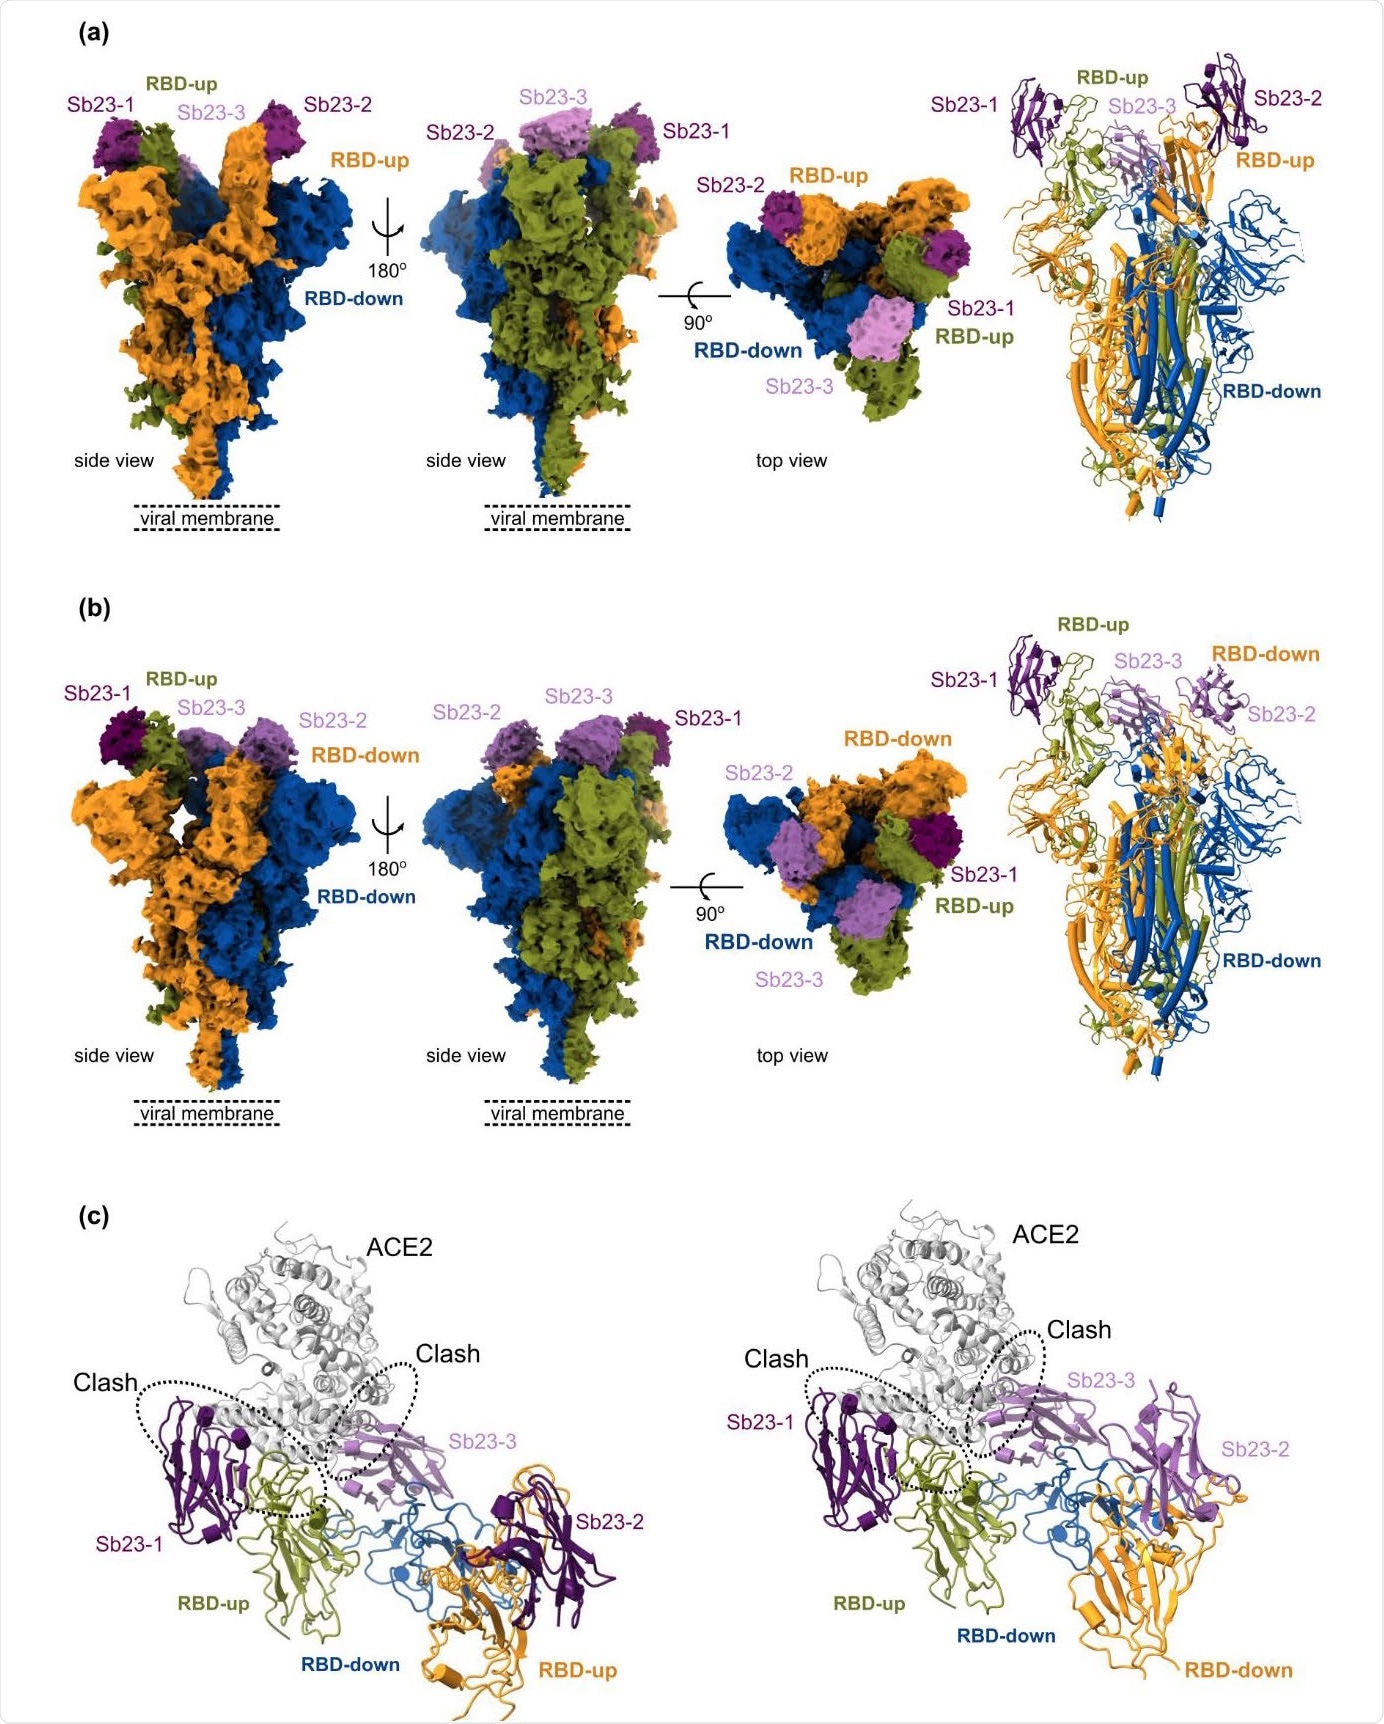 Cryo-EM reconstruction of SARS-CoV-2 spike bound to Sb23 - (a) Locally-sharpened Coulomb potential map and cartoon model of Sb23 bound to the spike protein in the ‘2-up’ conformation. (b) Locally-sharpened Coulomb potential map and cartoon model of Sb23 bound to the spike protein in the ‘1-up’ conformation. (c) Cartoon model of Sb23- bound Spike in the ‘2-up’ (left) ‘1-up’ (right) conformation showing how ACE2 binding is blocked by Sb23 bound to the RBD in the ‘up’ conformation as well as Sb23 bound to the neighboring RBD in the down conformation.